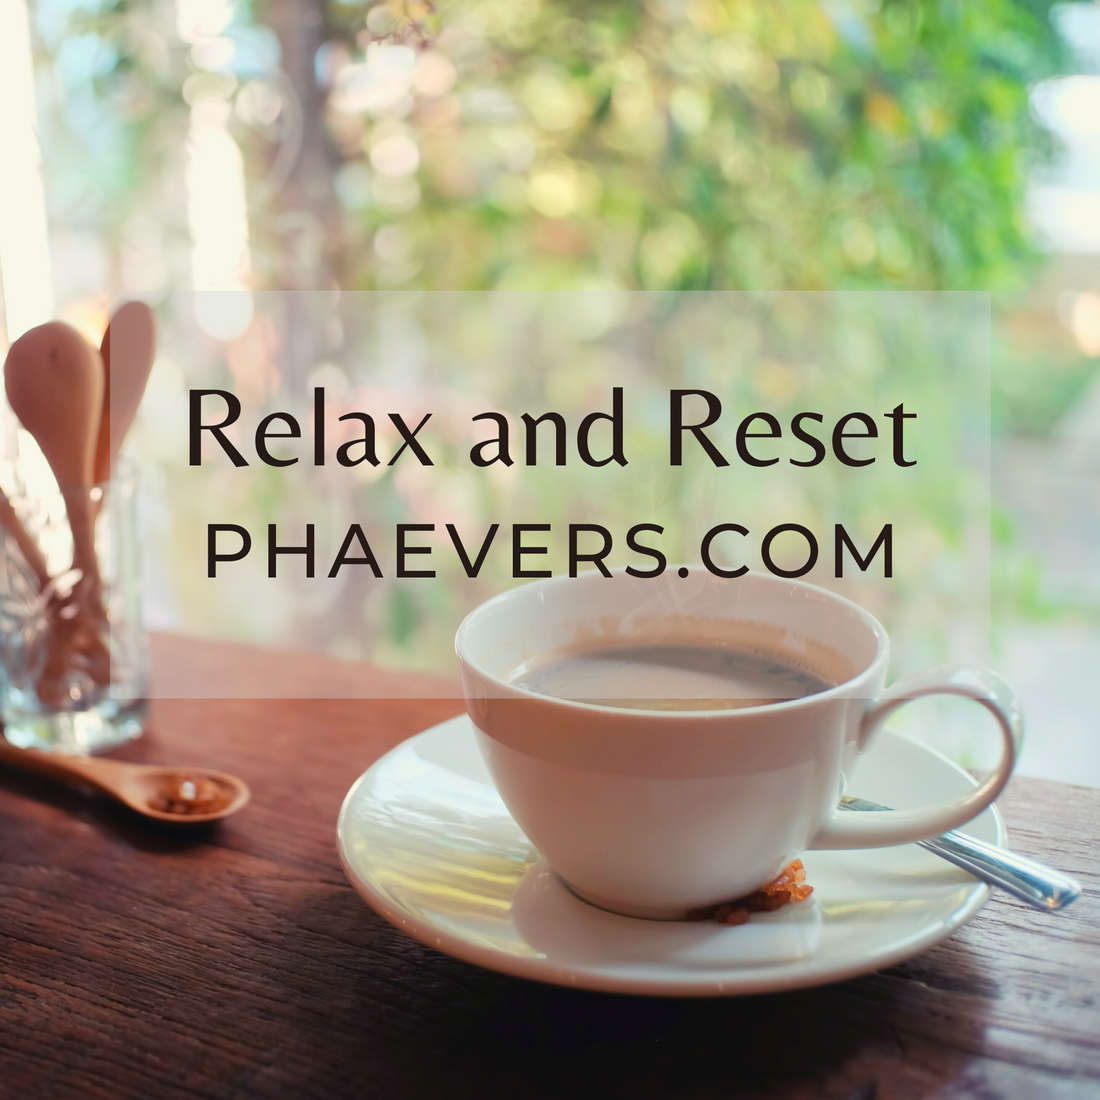 Relax and Reset